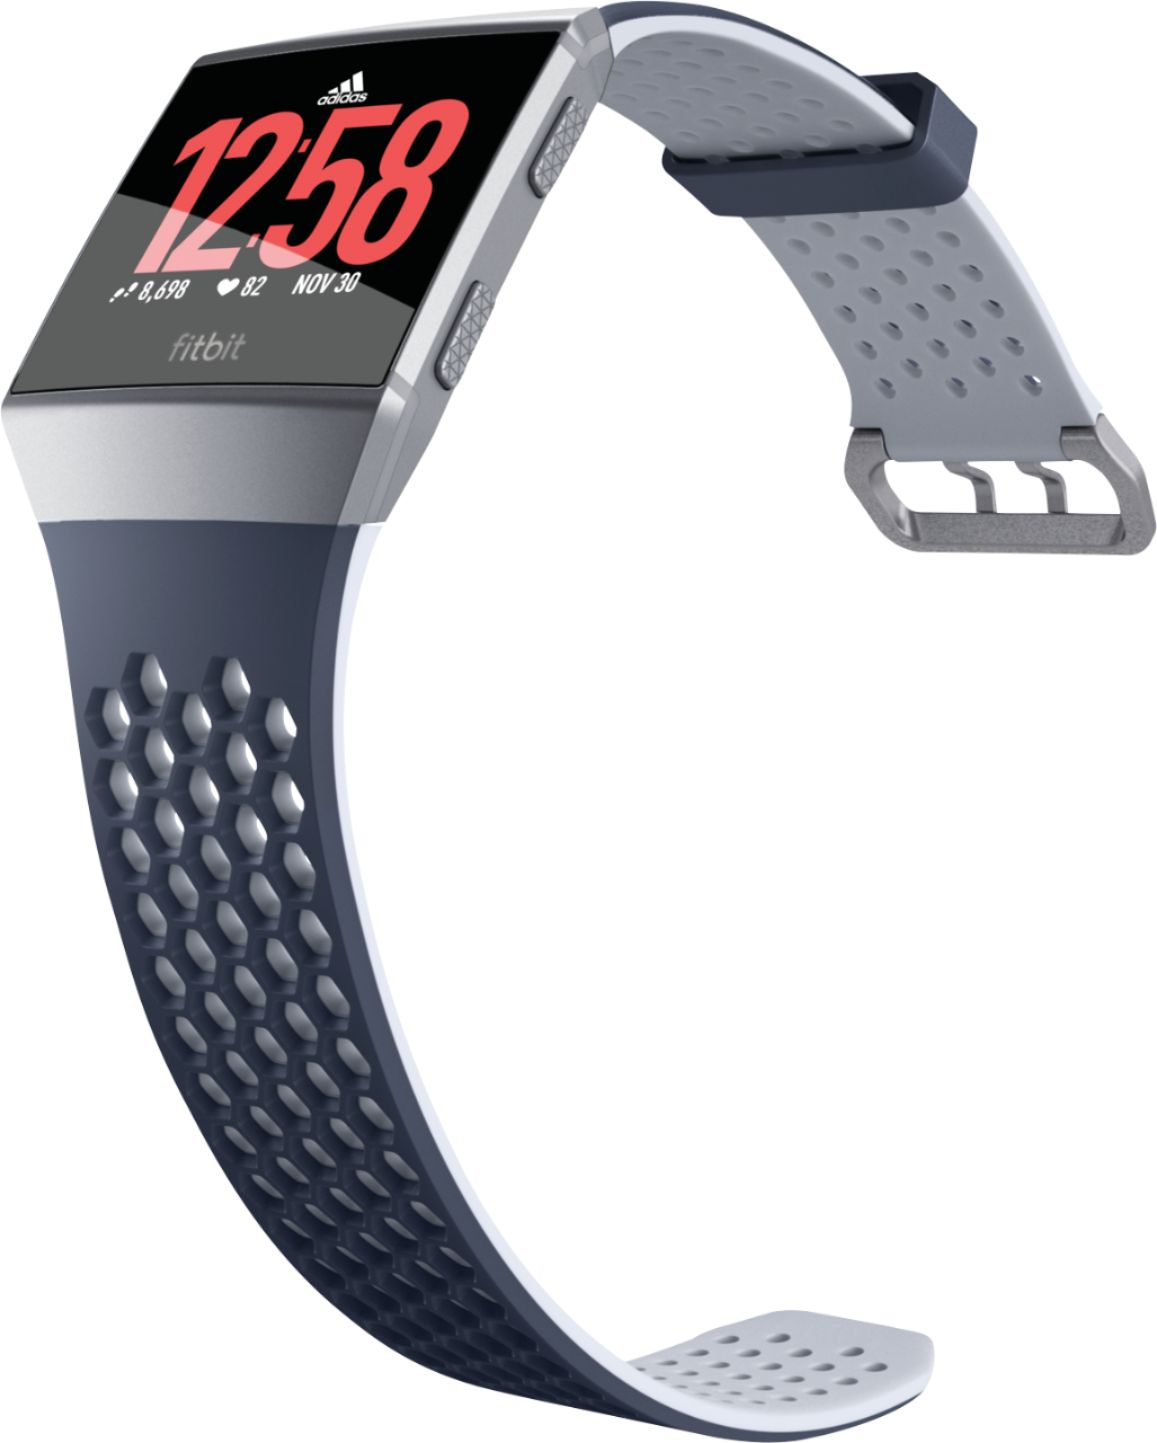 fitbit ionic target